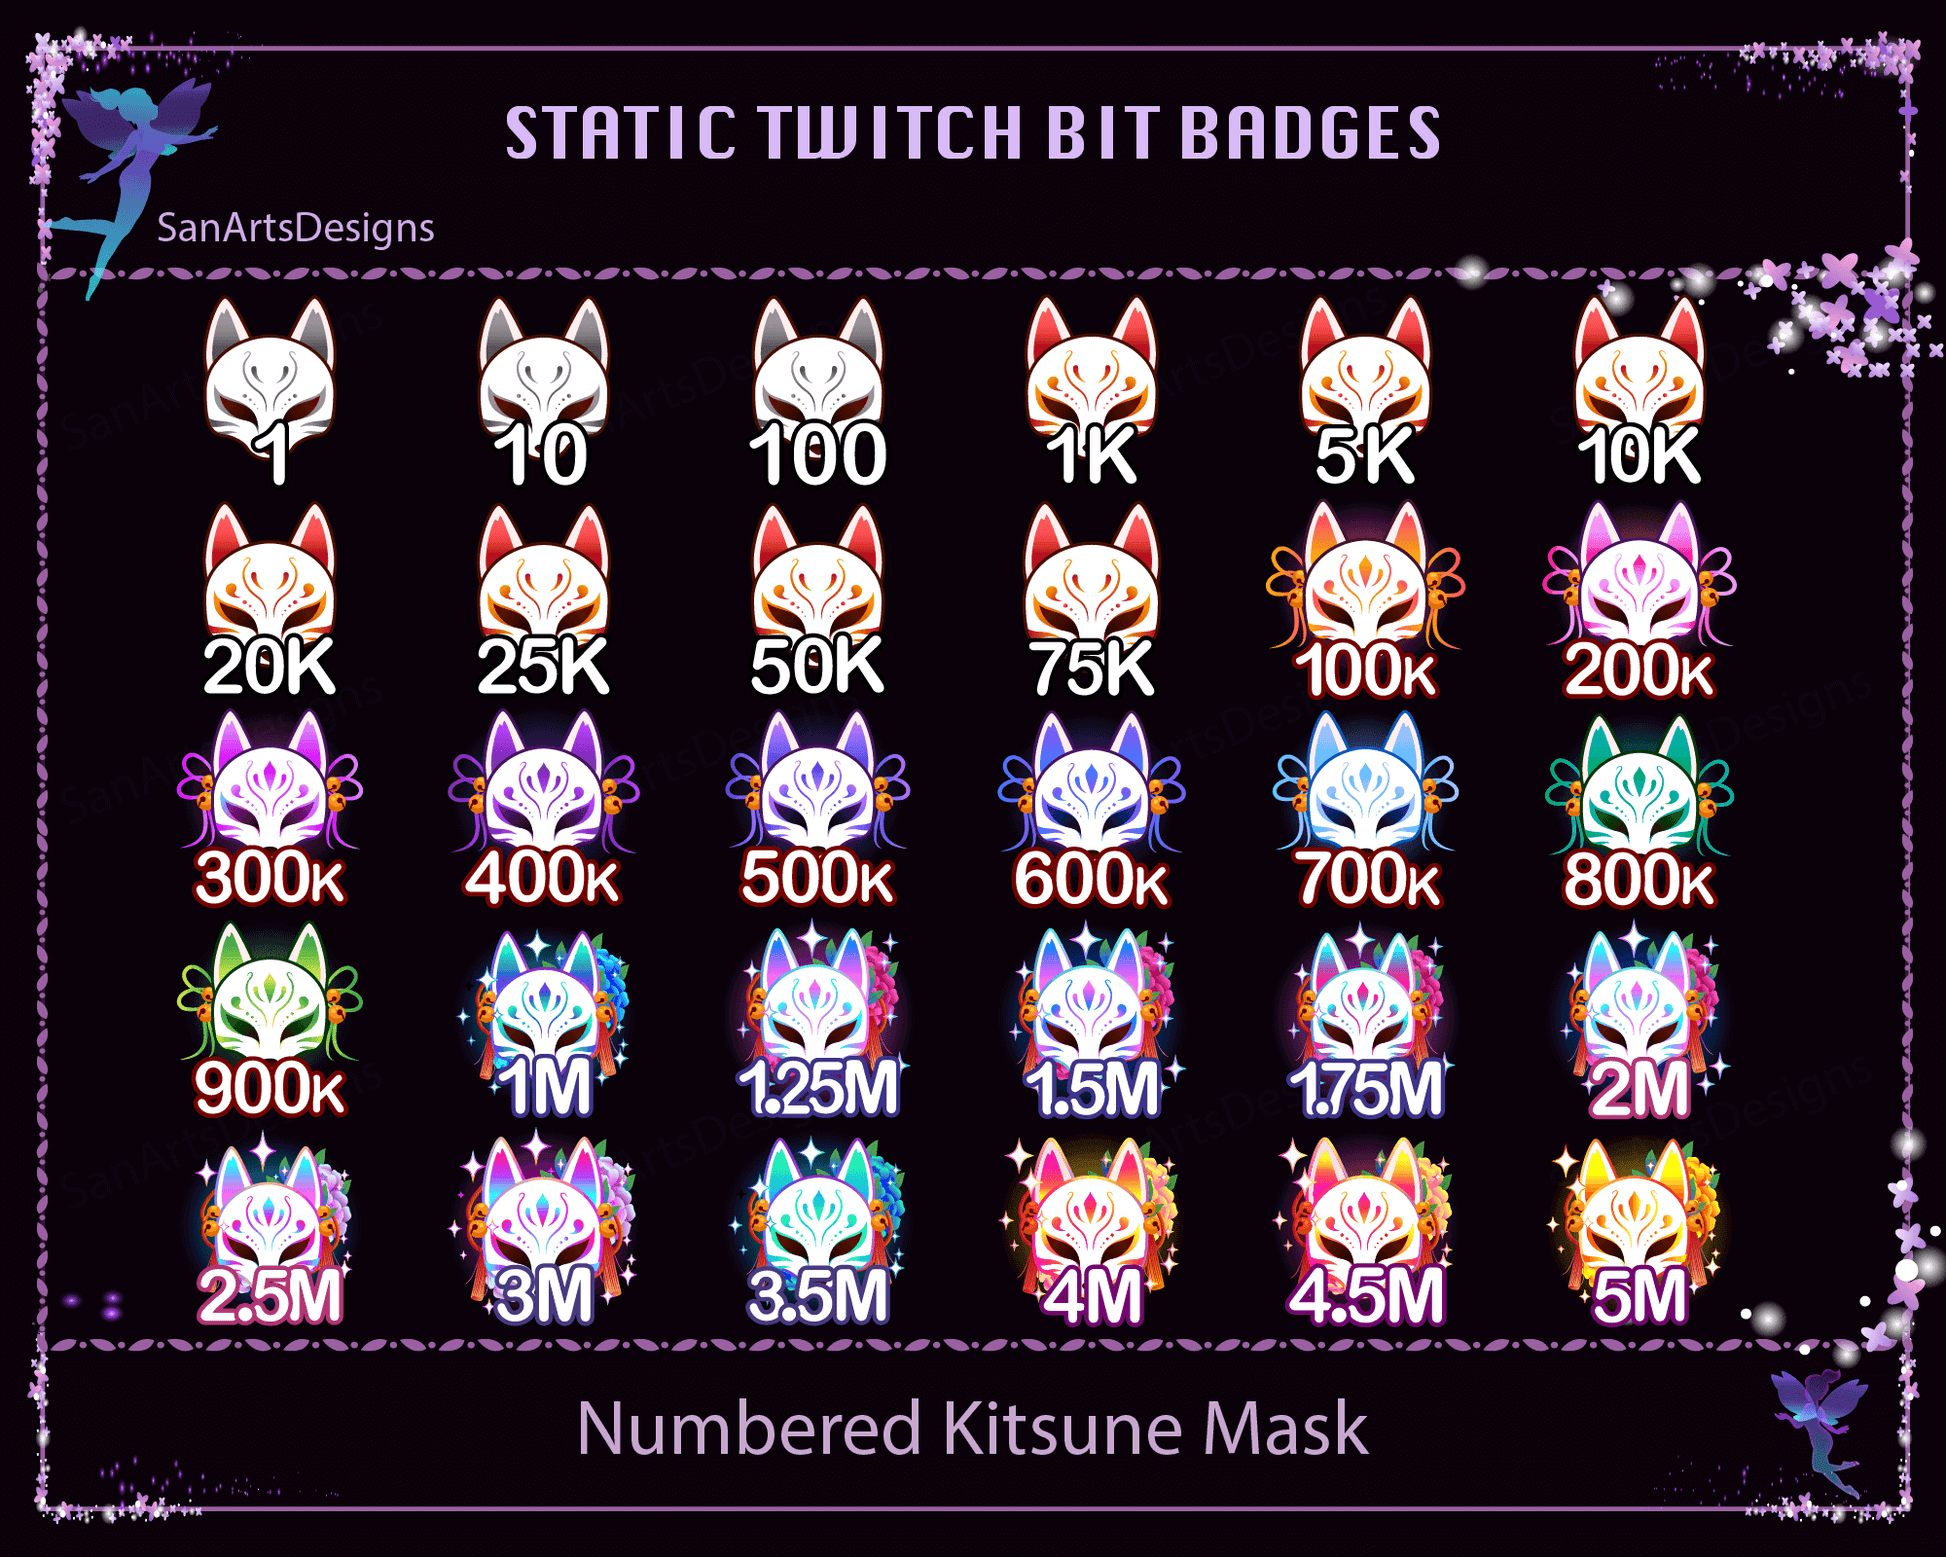 Wolf Badges and Emotes Twitch Sub Badges Twitch Badges -  Finland